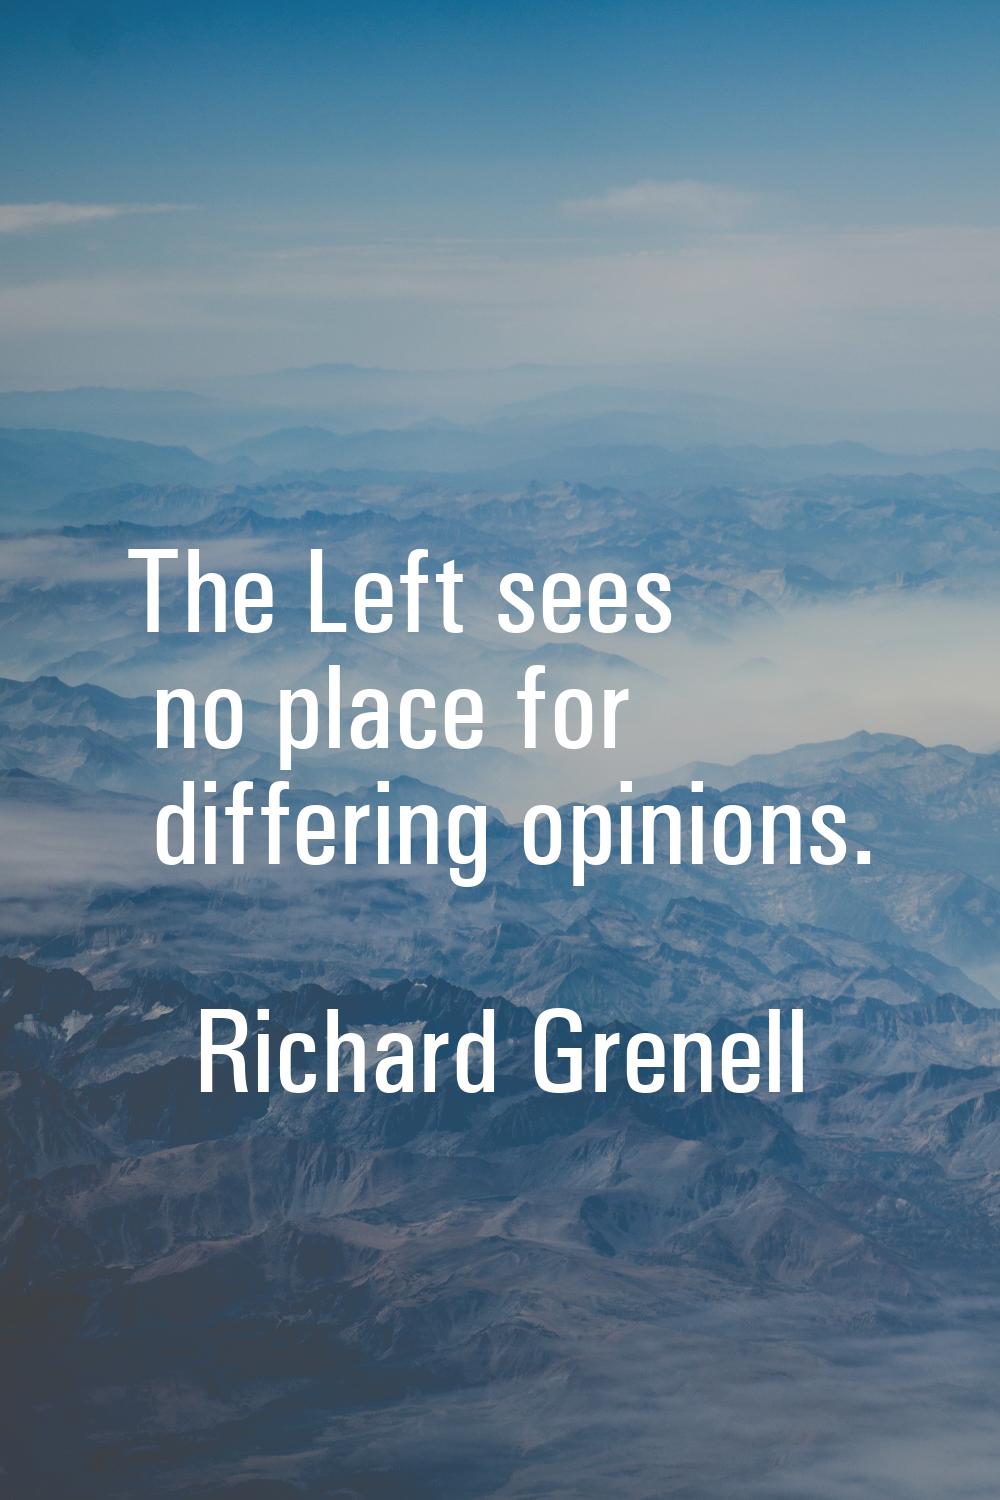 The Left sees no place for differing opinions.